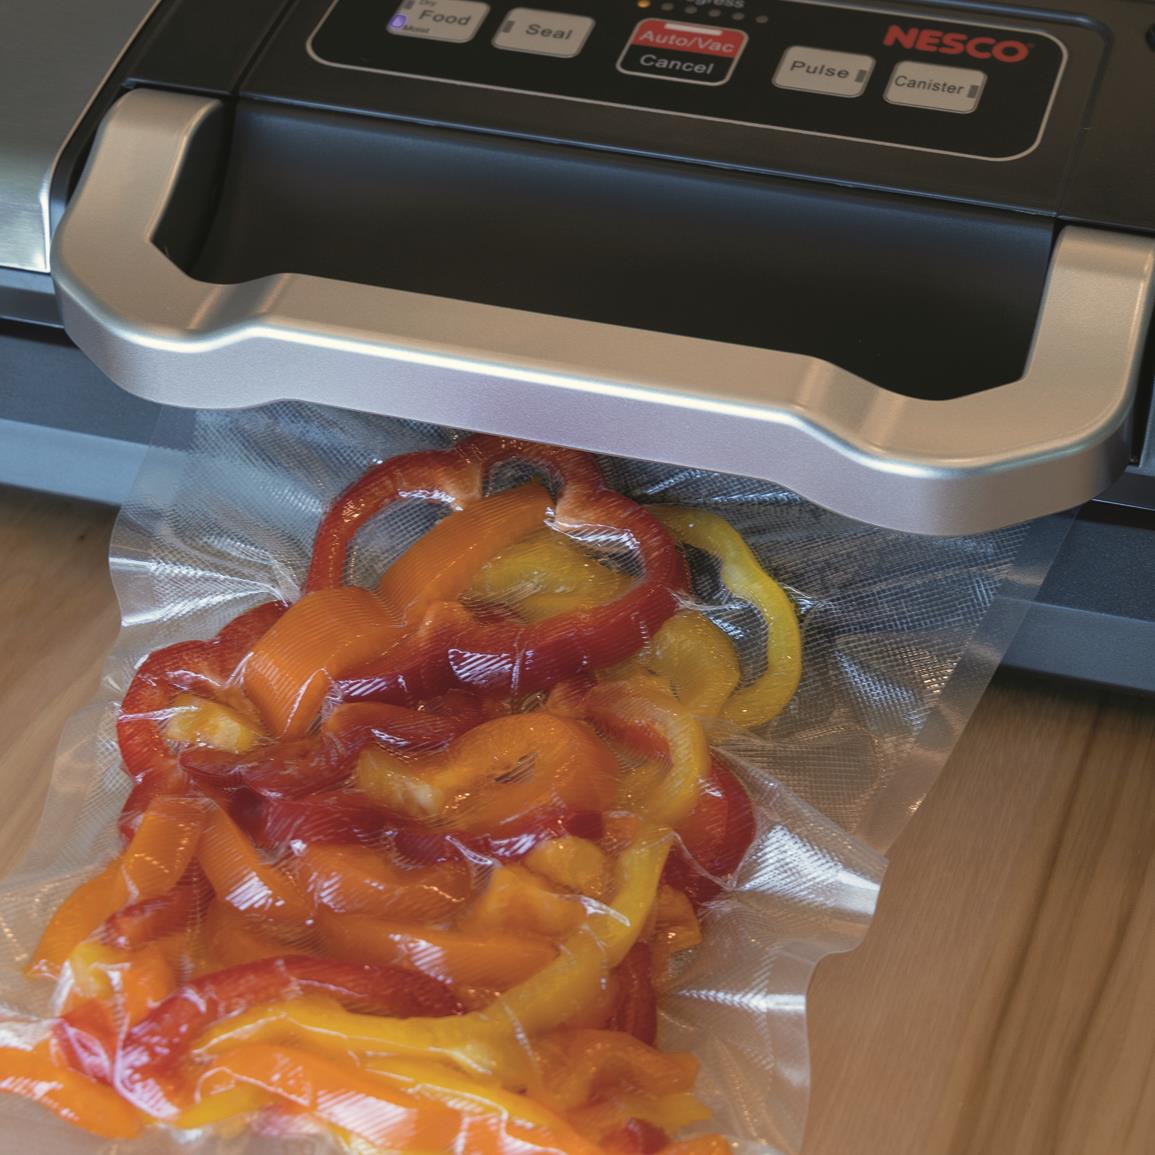 MaxVac Vacuum Sealer 3 Piece Canister Set and Hand Pump